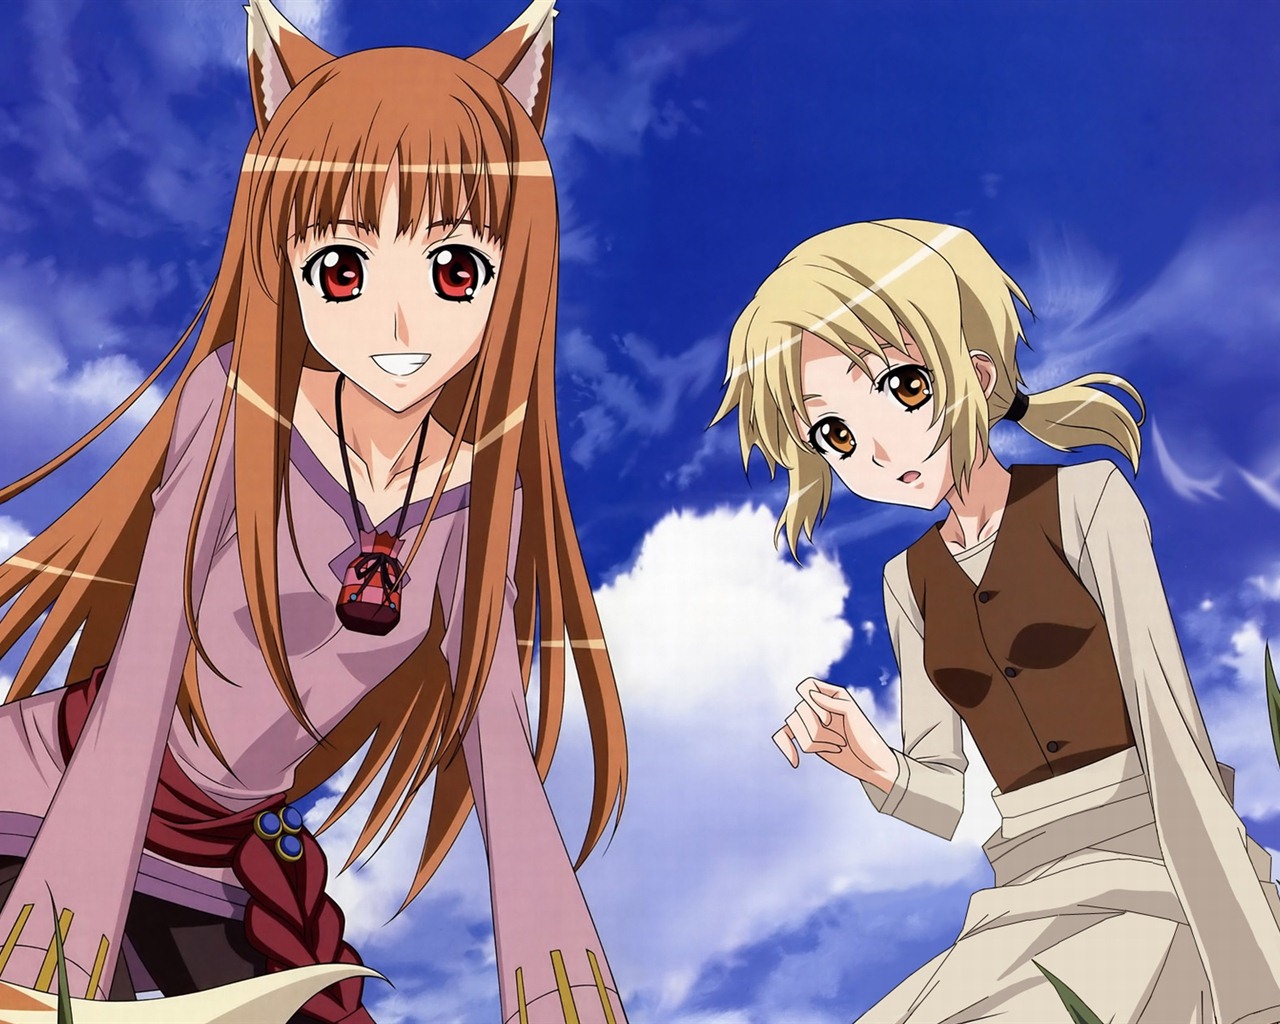 Spice and Wolf HD wallpapers #17 - 1280x1024